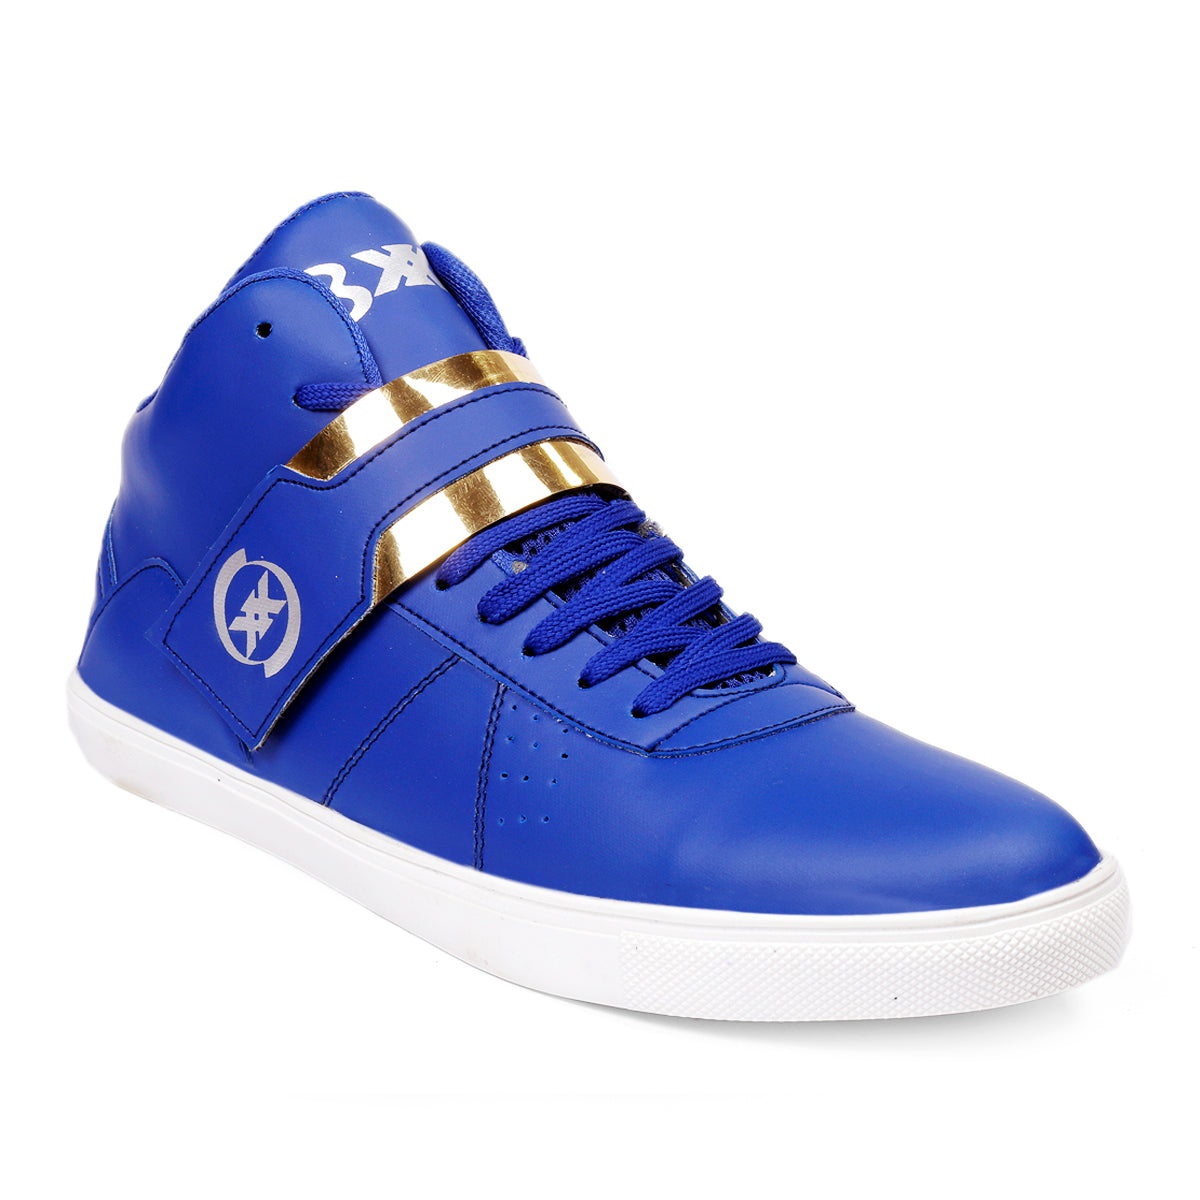 Men's Faux Leather Casual Sneakers With Lace And Strap Boots